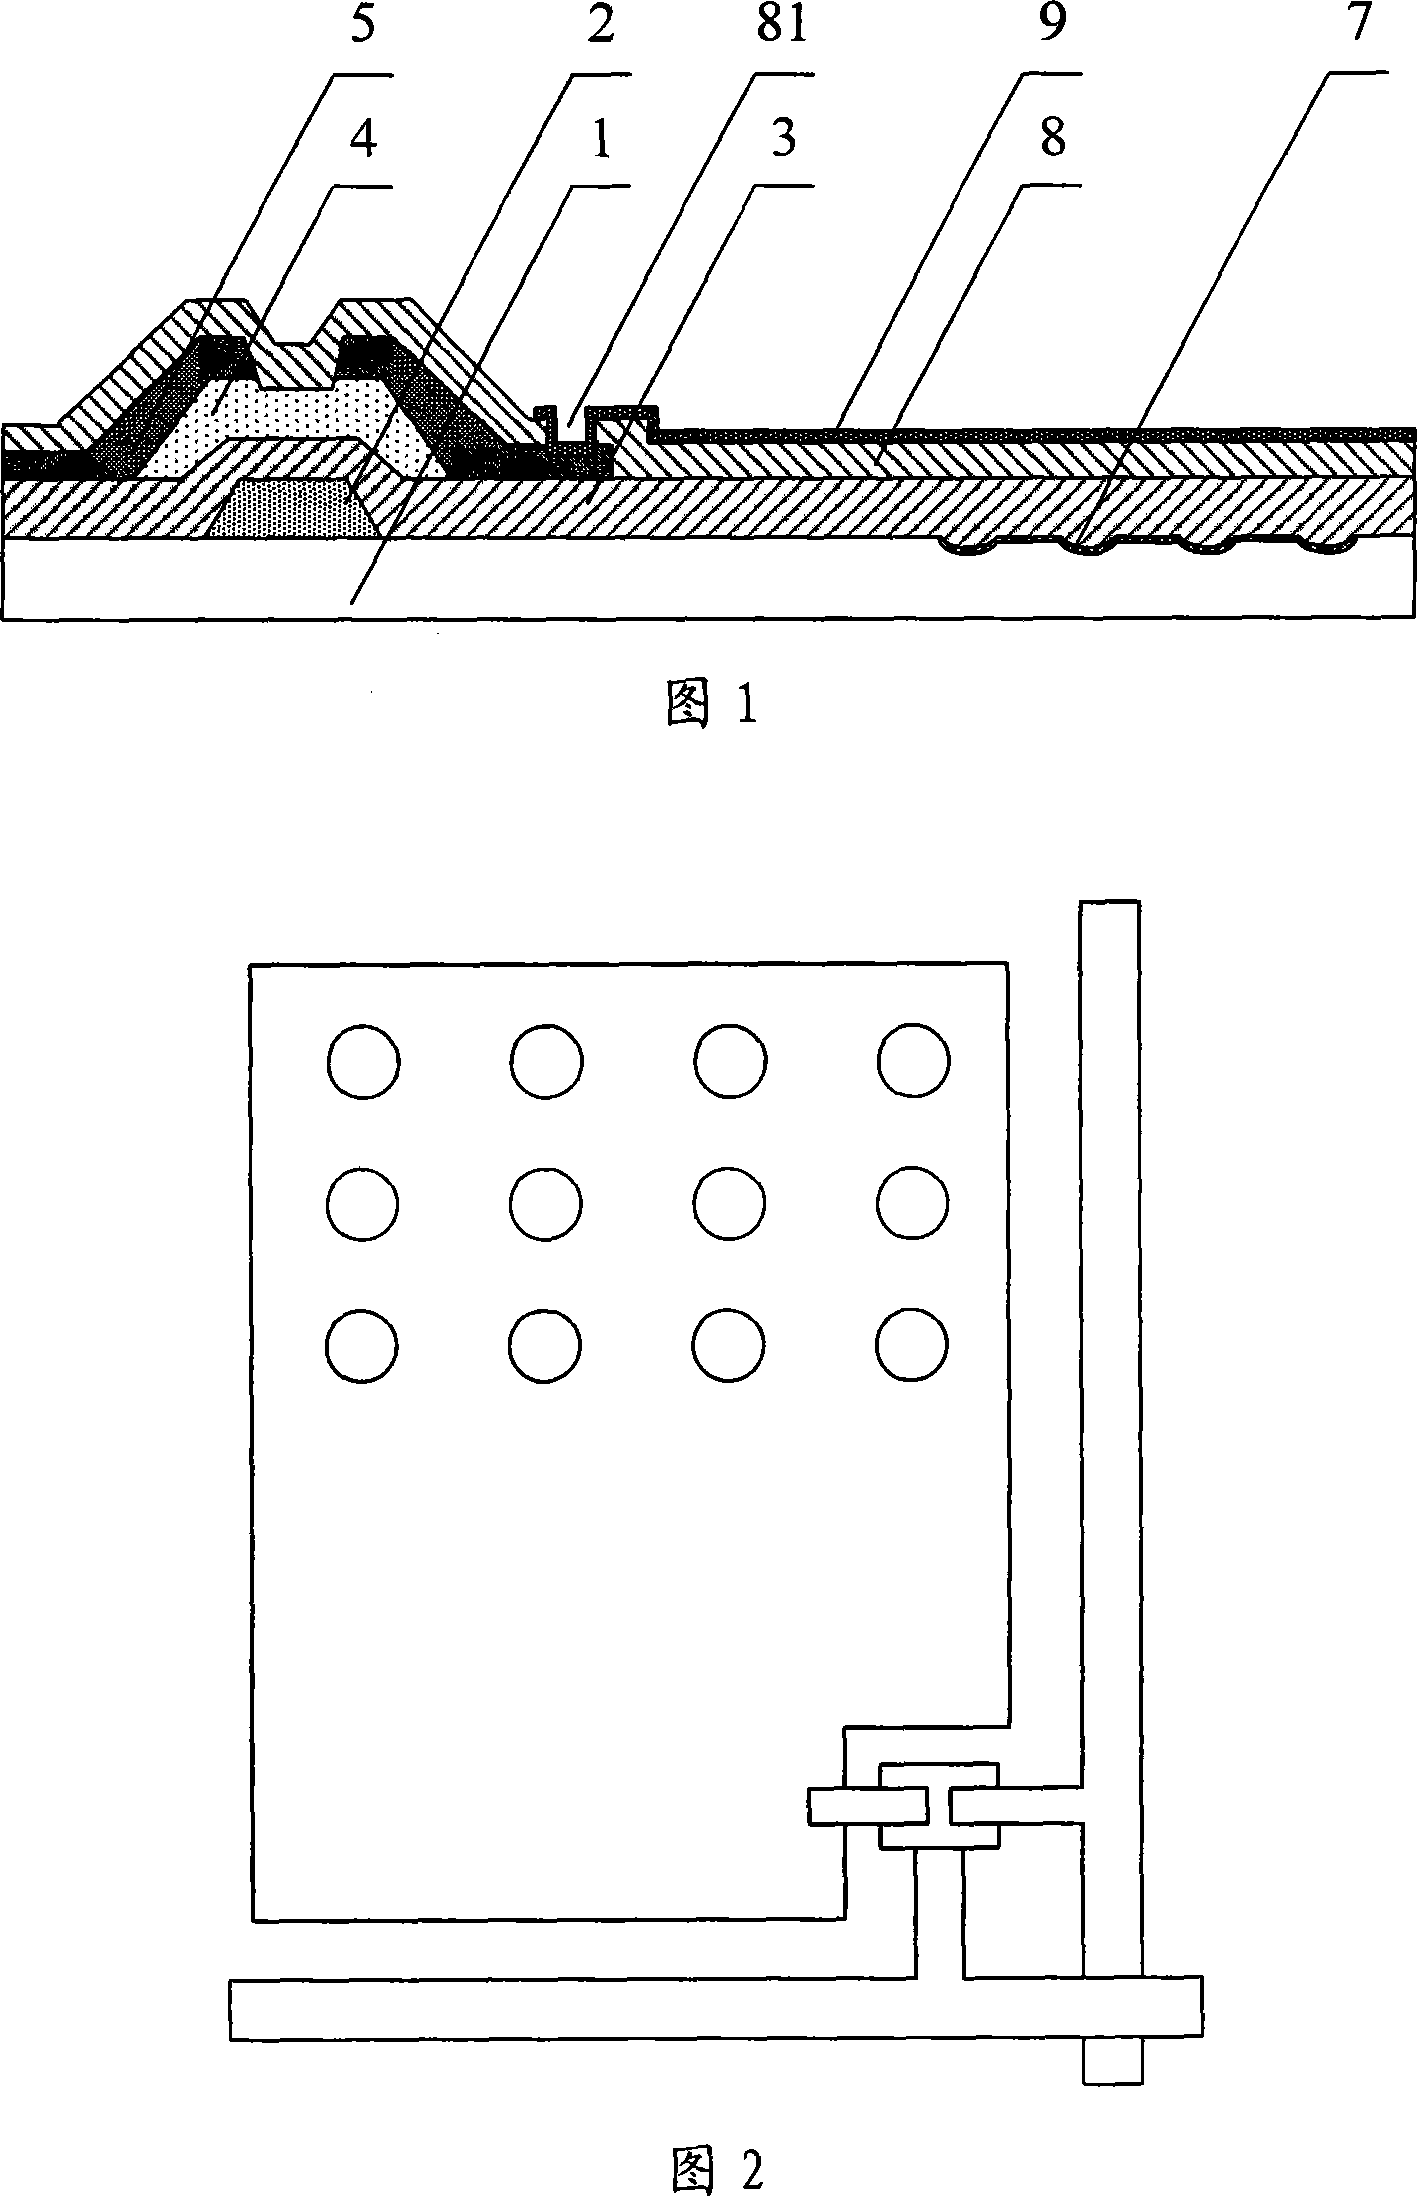 Reflection-permeation array substrate and method for manufacturing same